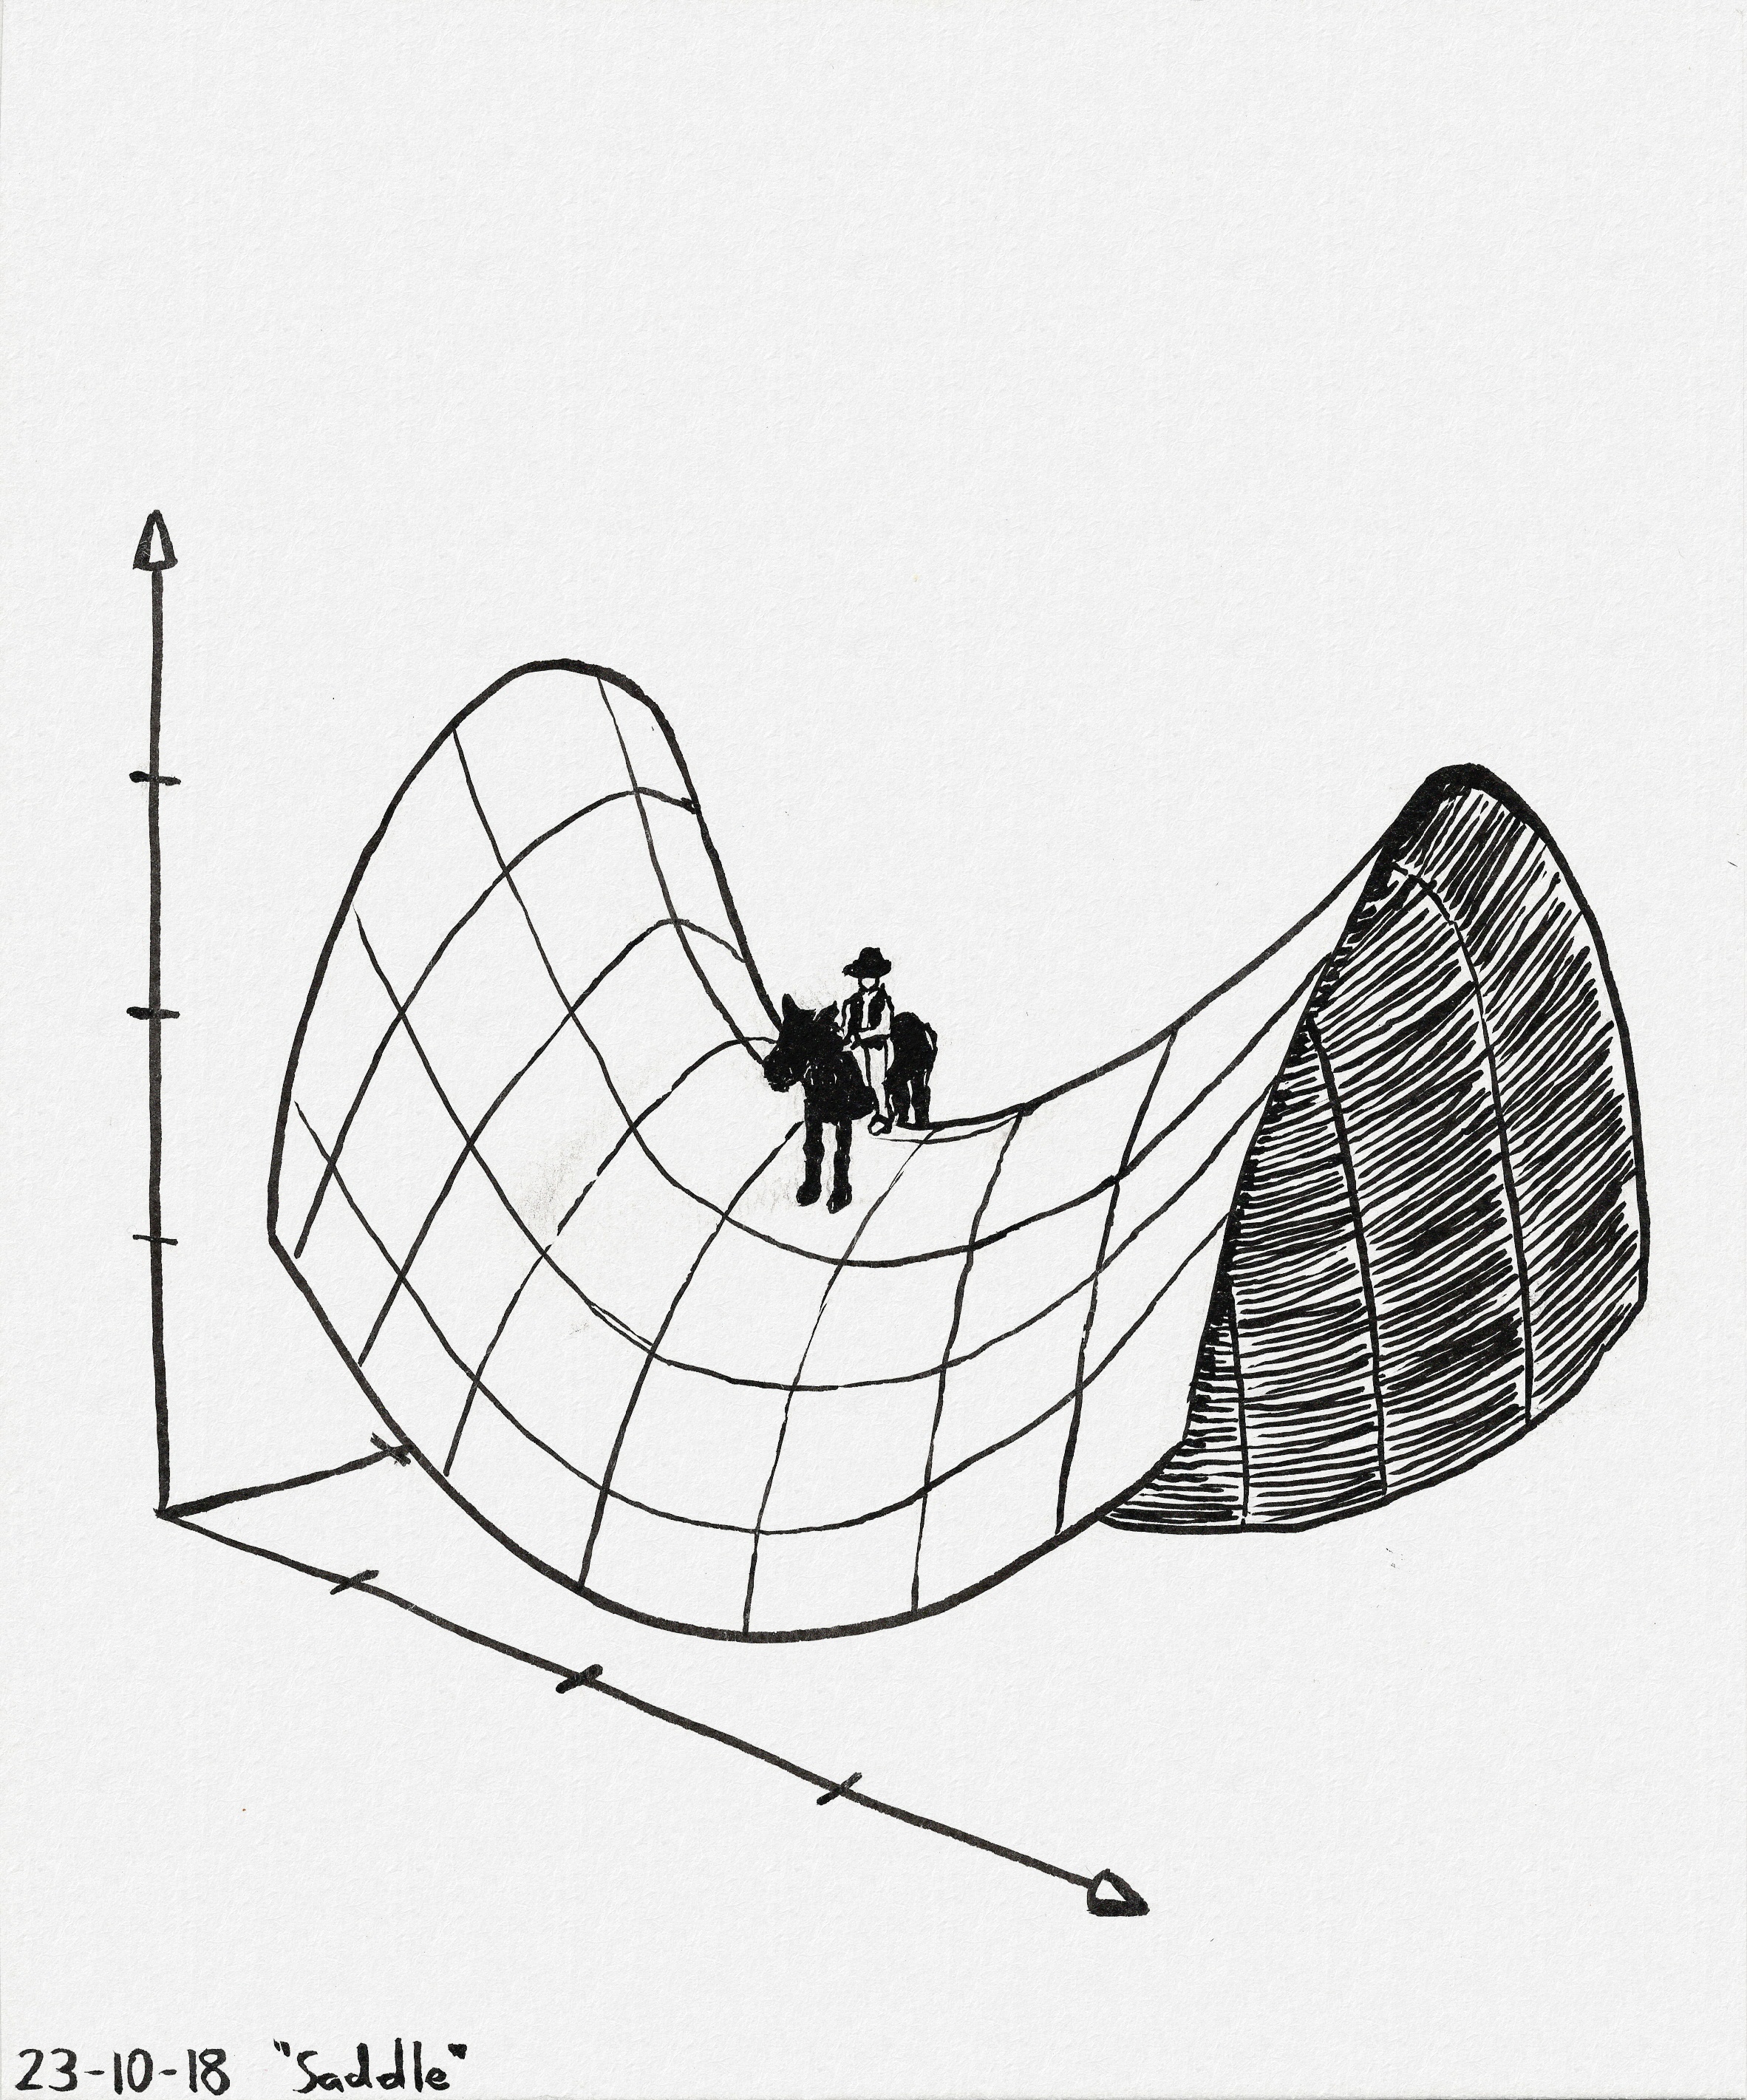 A hyperbolic paraboloid surface (shaped a bit like a saddle) with contour lines. On the flat part in the middle (at the saddle point), a cowboy sits on top of a black horse.